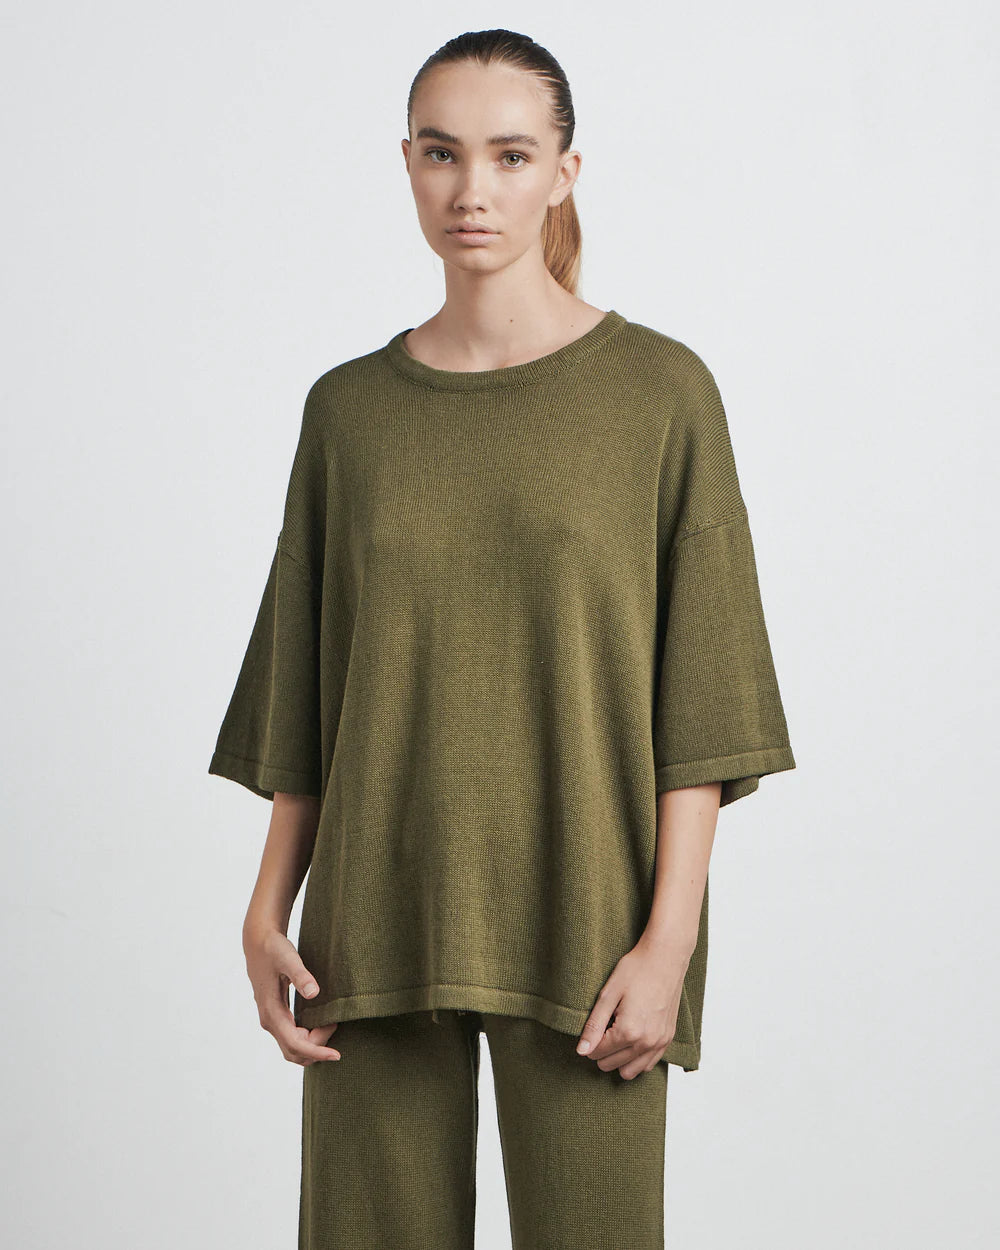 the knitted tee | nutmeg | bare by charlie holiday